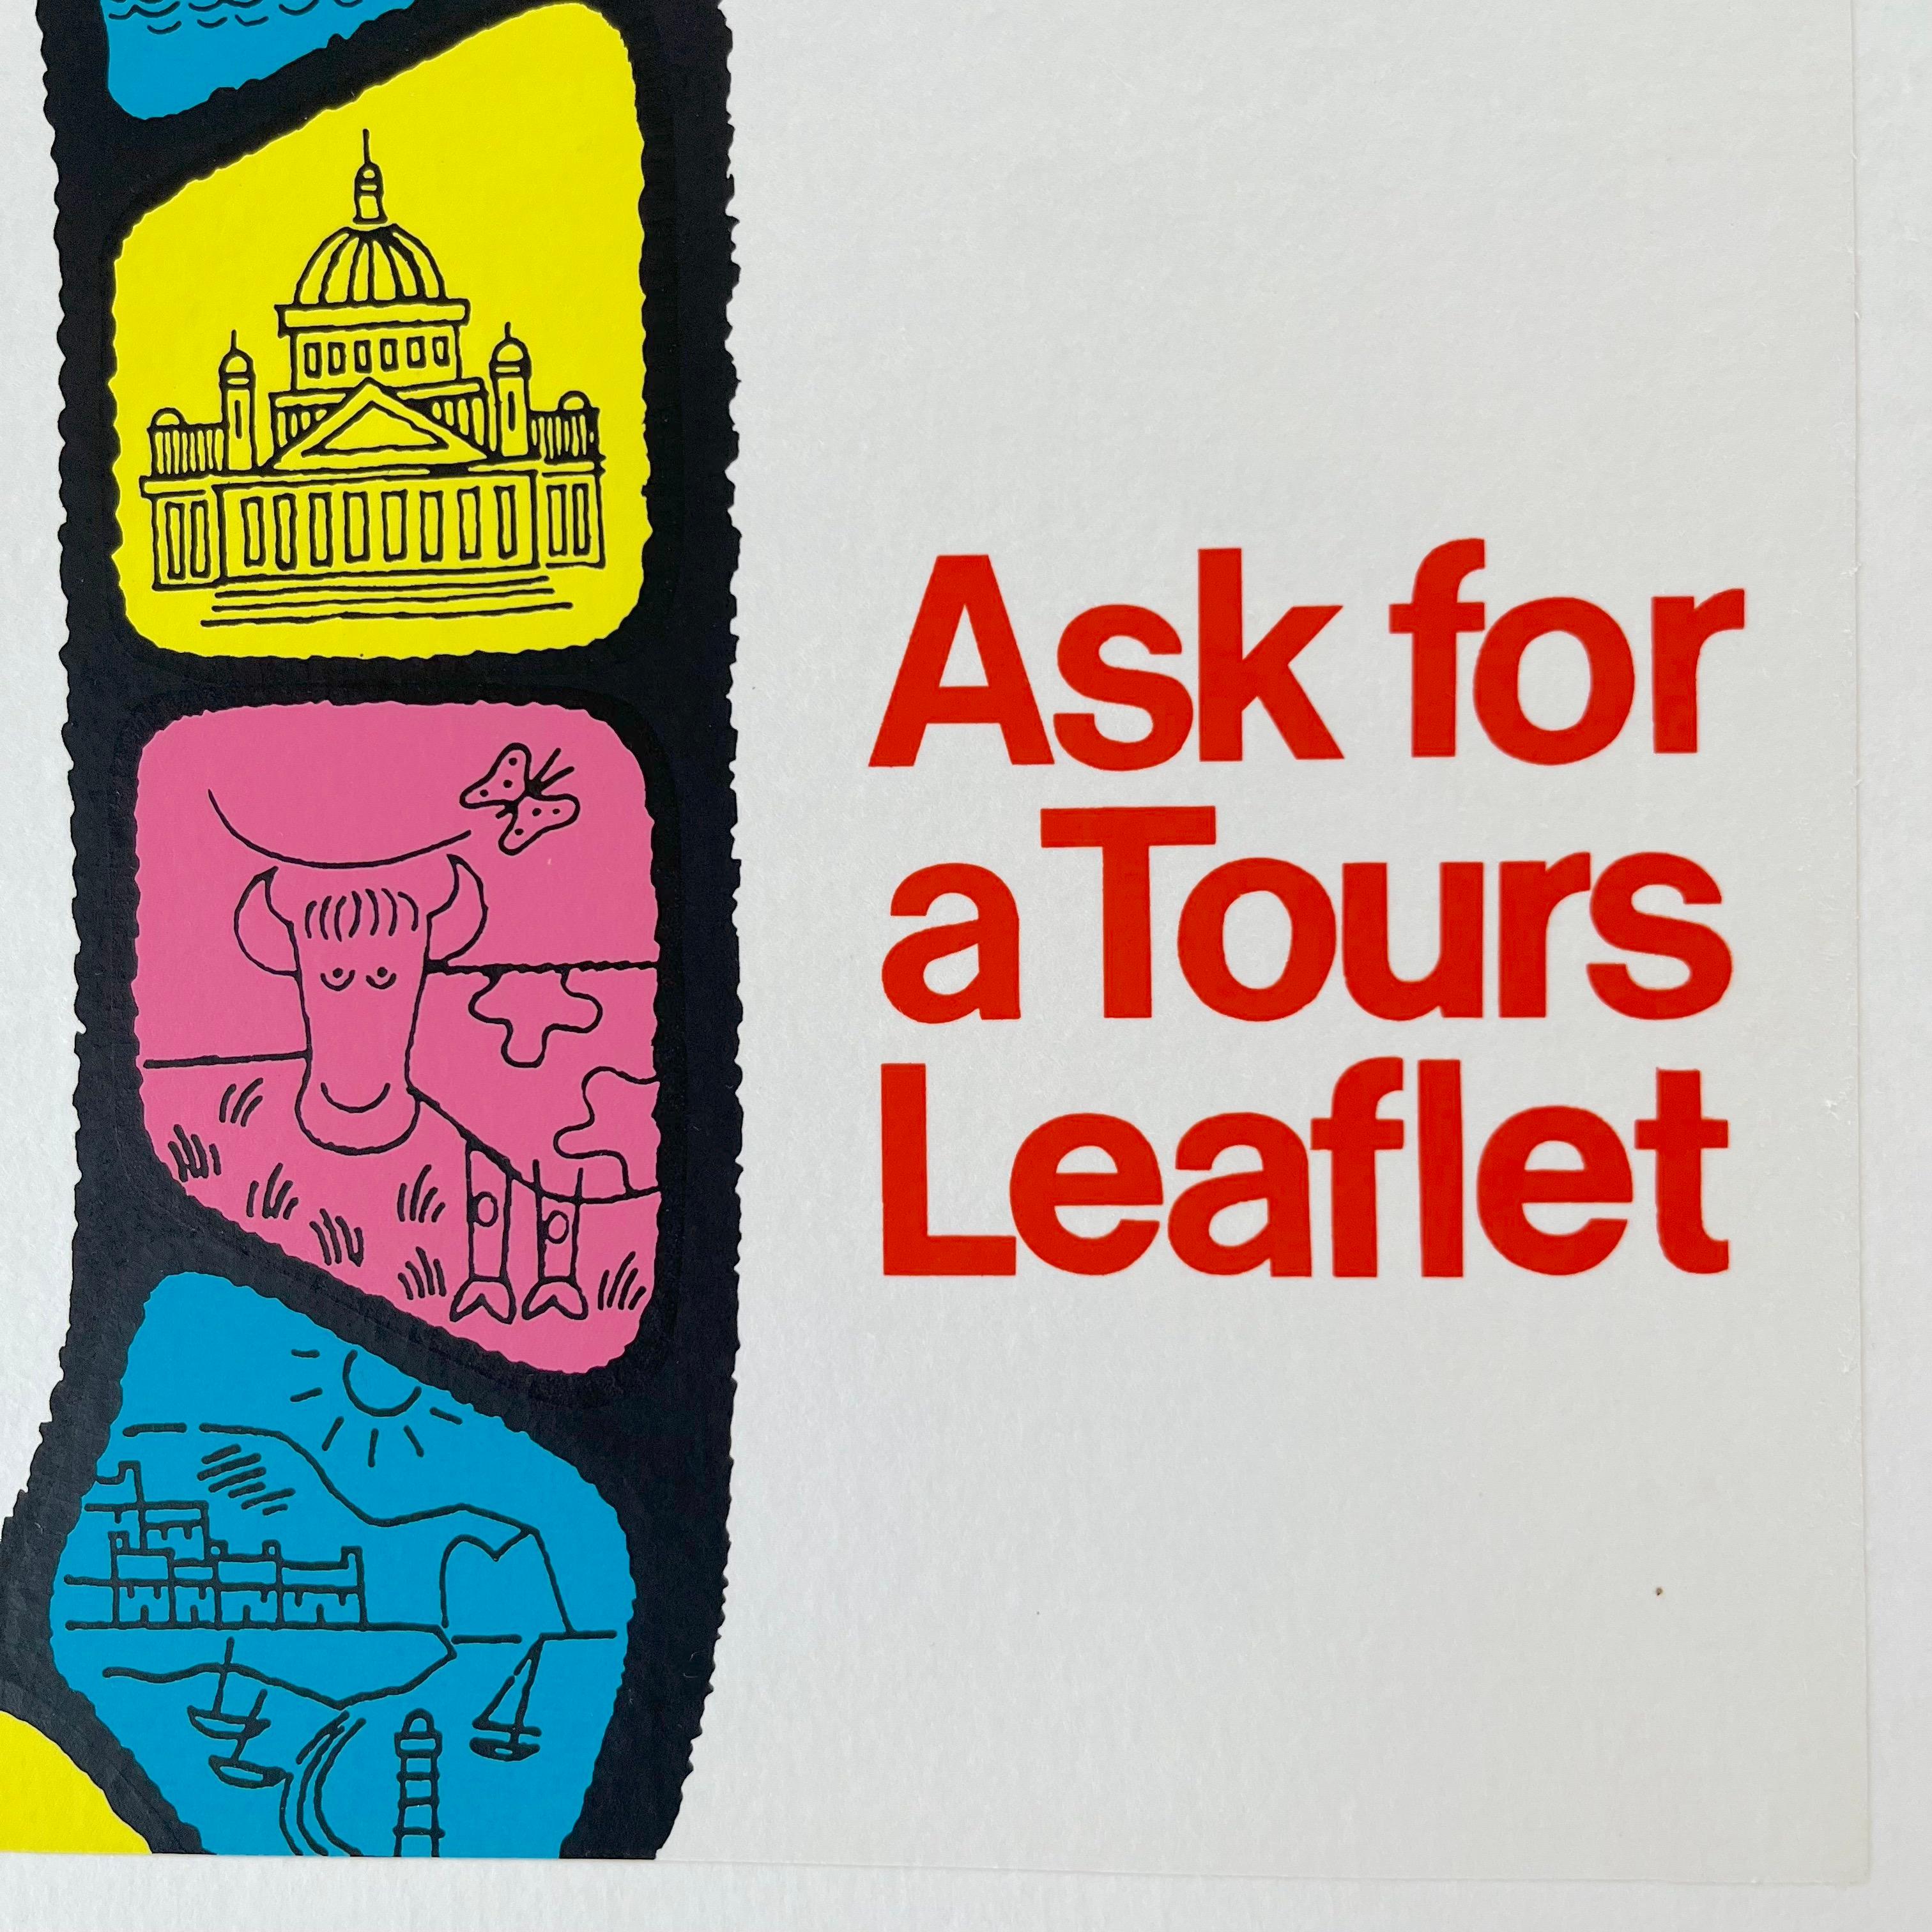 Original English 1960's bus panel poster promoting coach tours around Britain. This rare poster would have been displayed in a travel bureau or on a bus or coach serving routes around the UK.  Coach firms had a captive market before the advent of